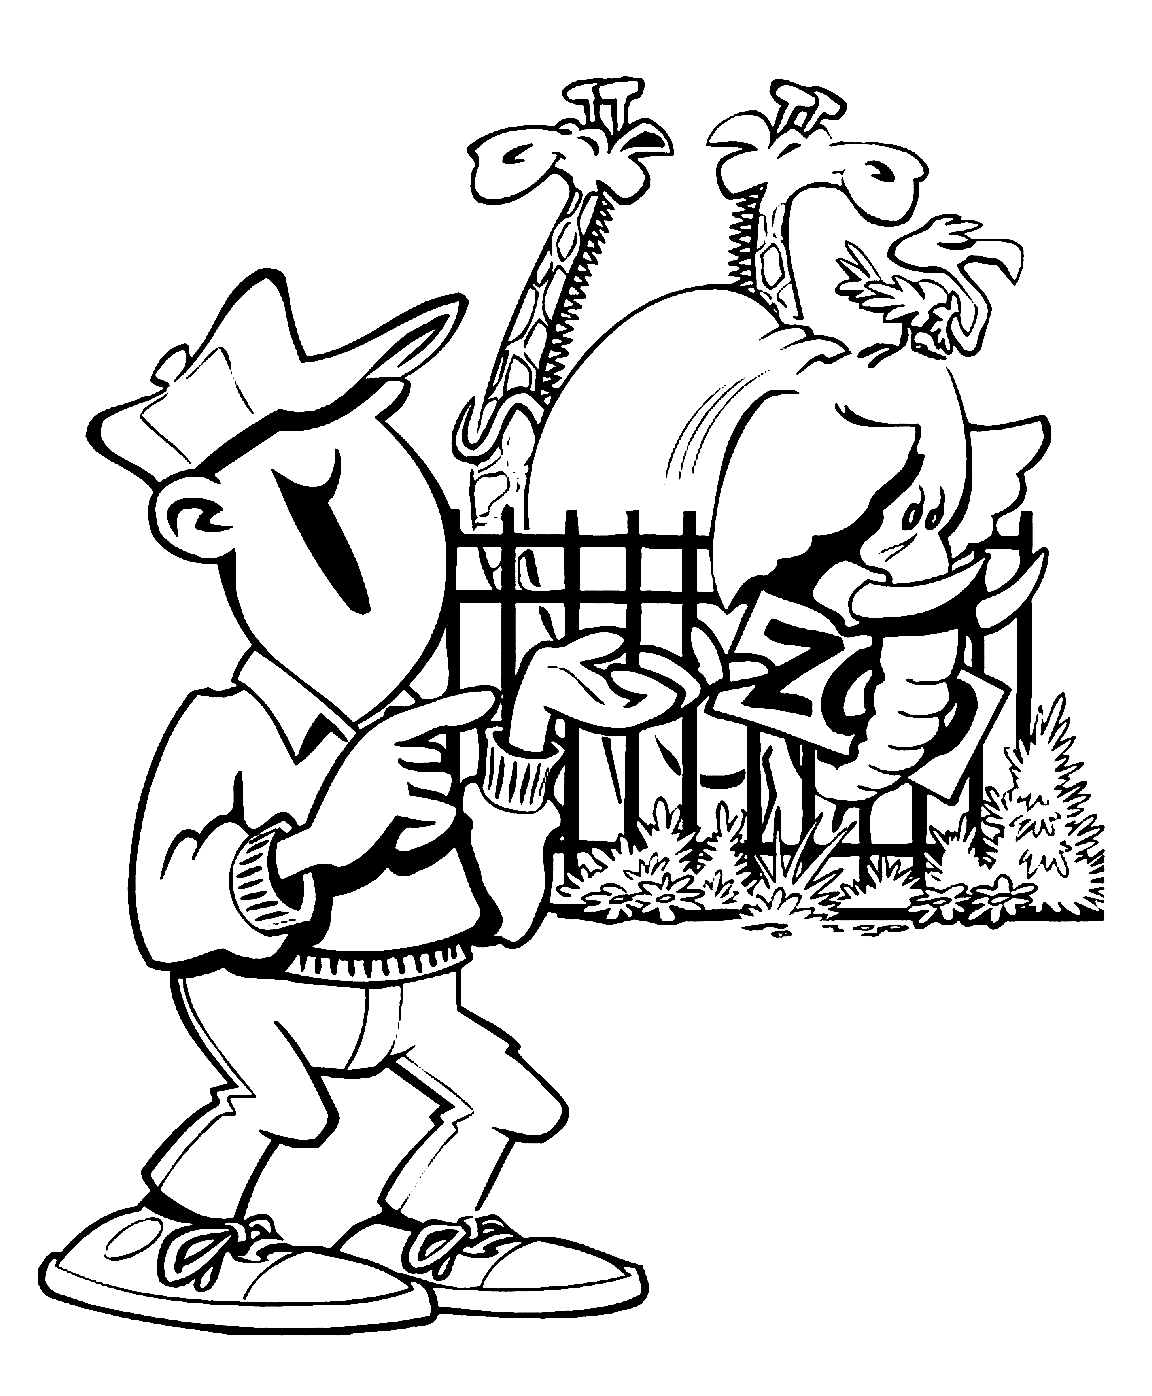 Funny Zoo Coloring Page